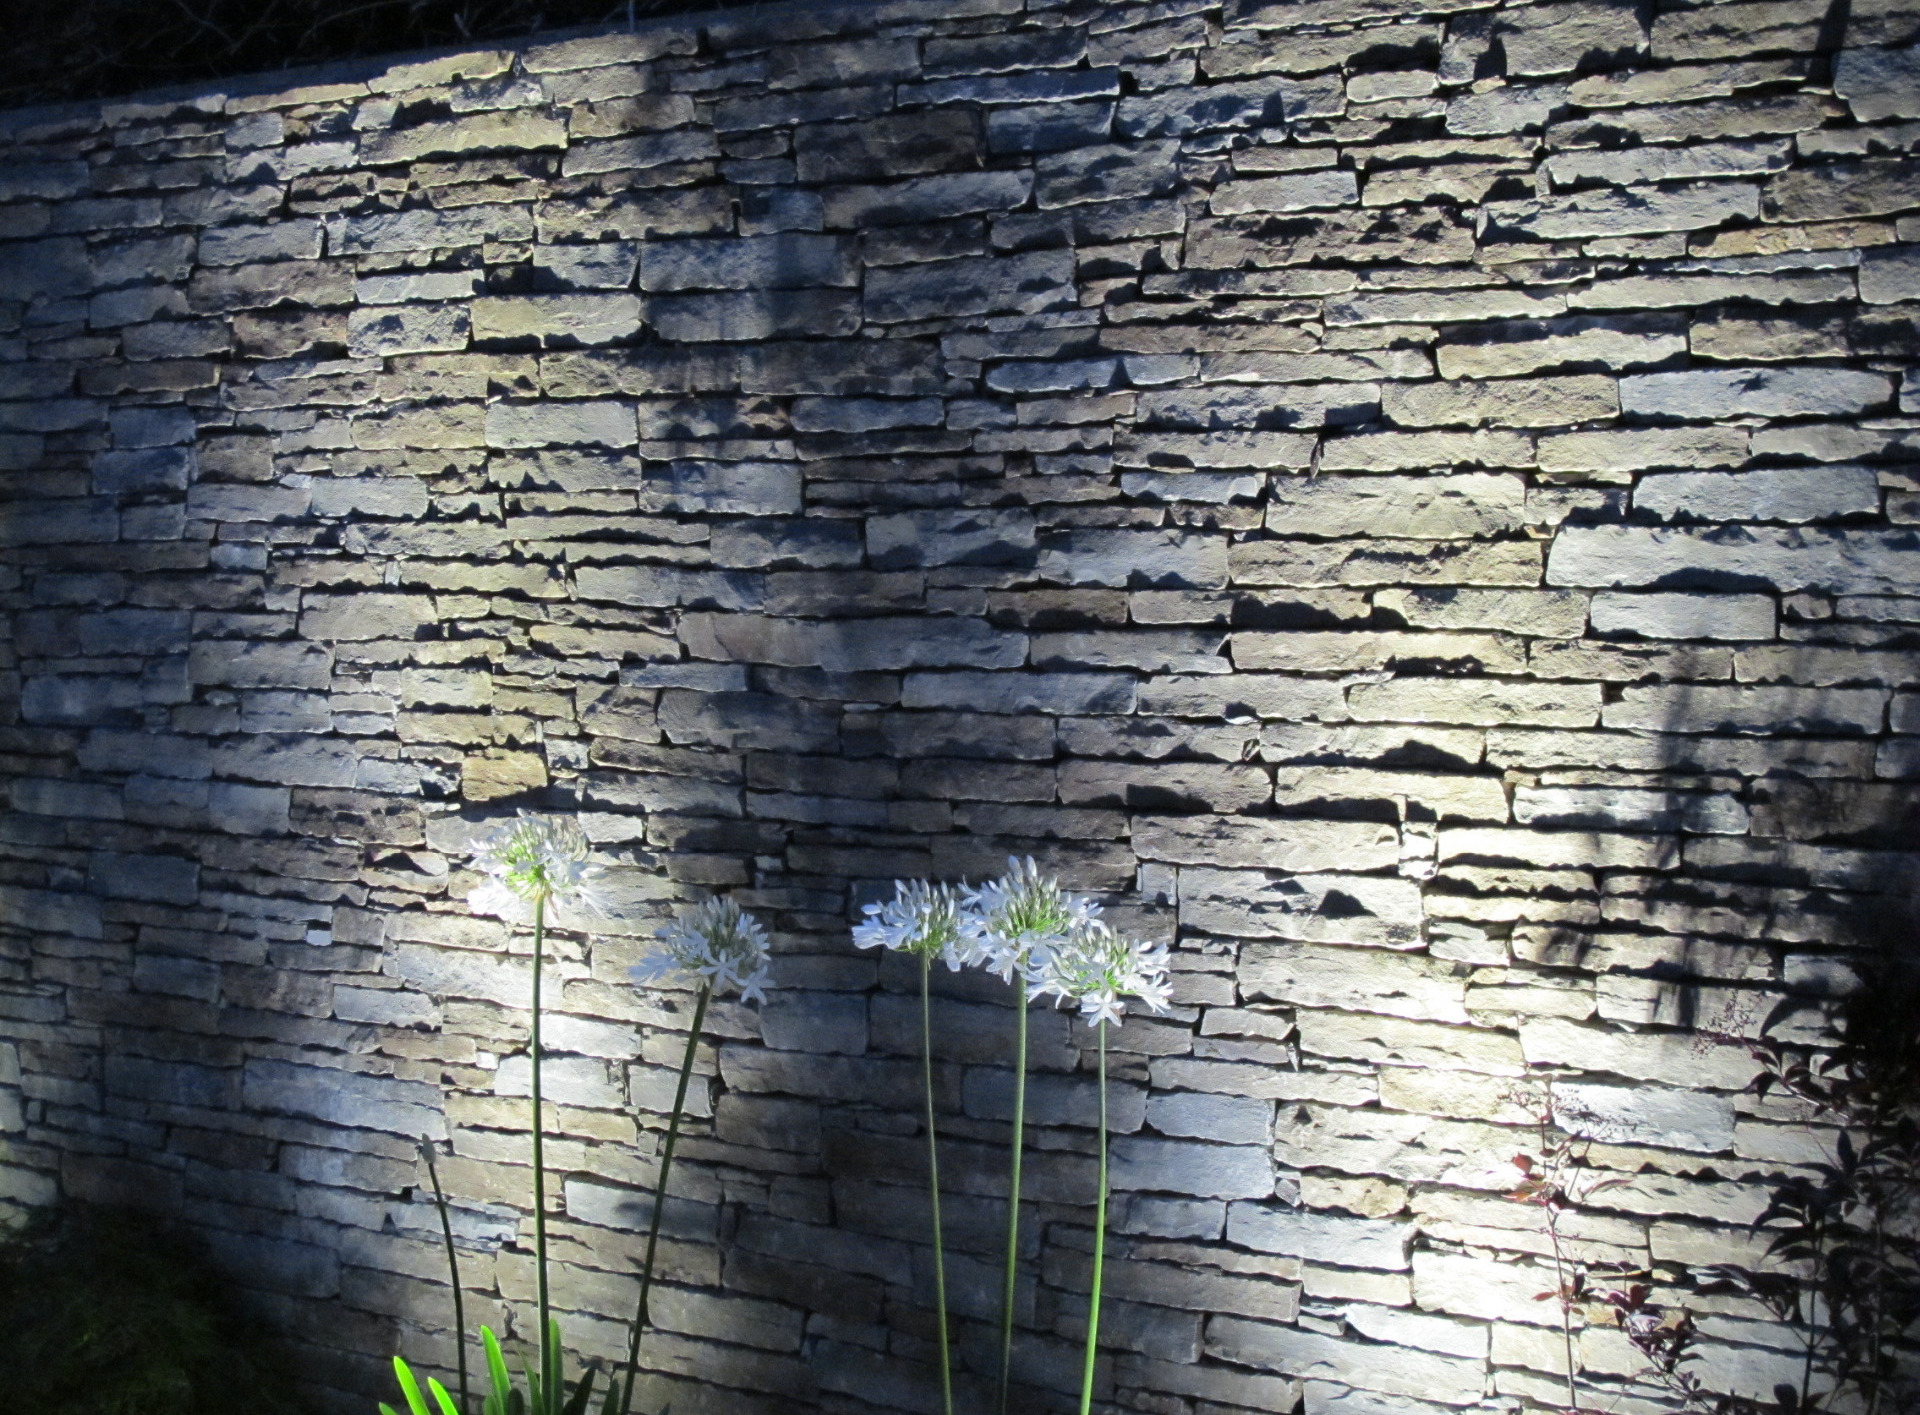 Natural stone a stunning garden wall finish for garden walls and an eye catching visual feature after dark